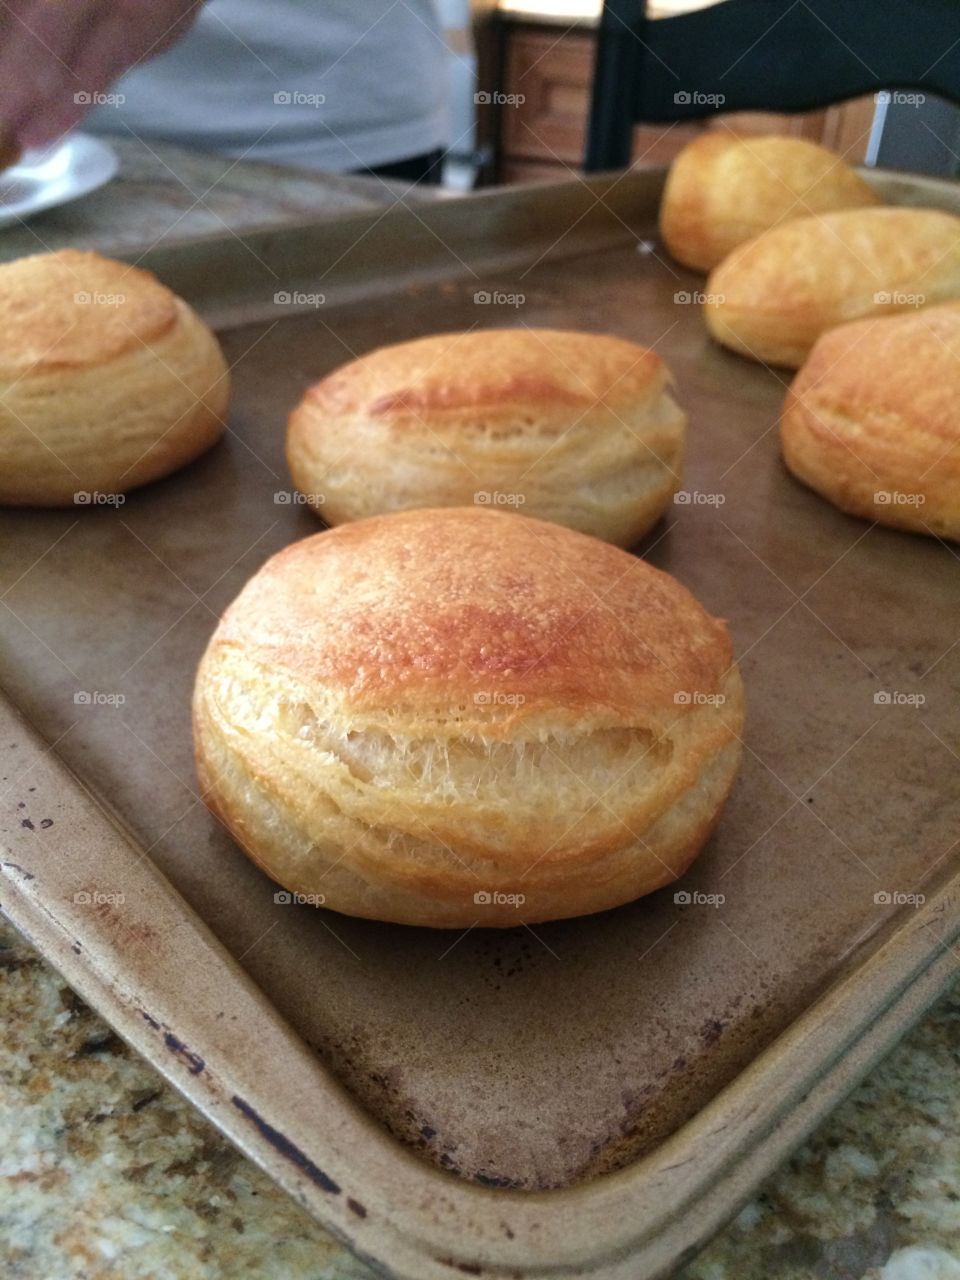 Golden Biscuits. Perfectly baked golden brown biscuits for Sunday breakfast. 